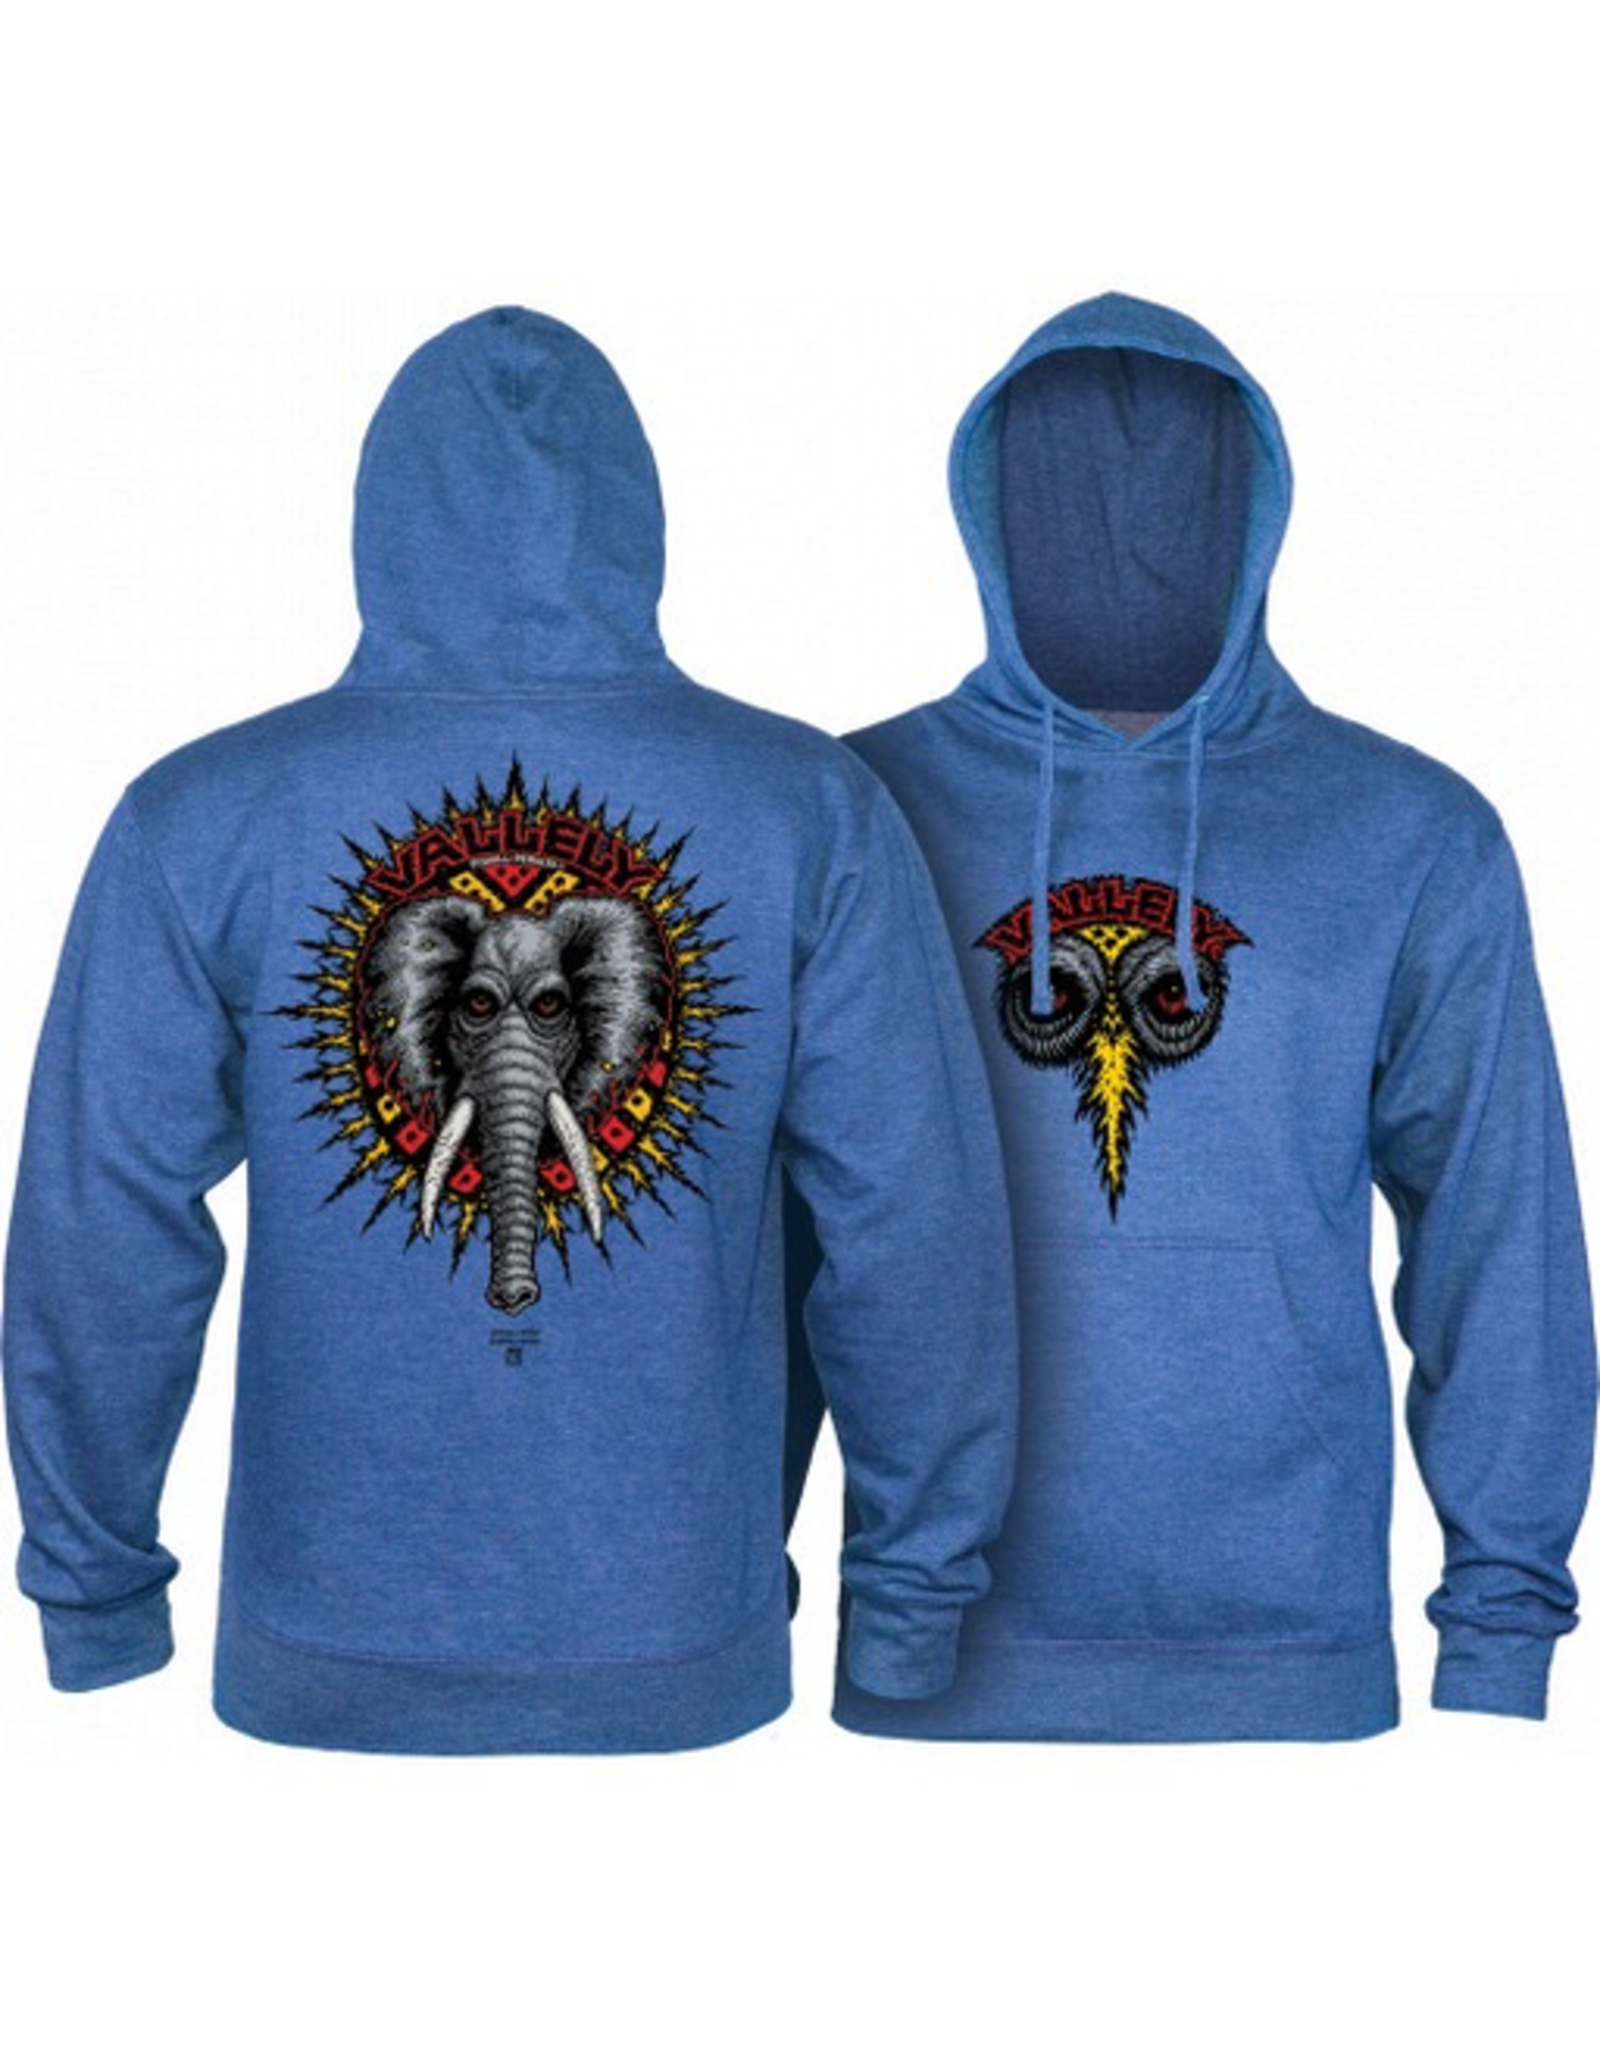 POWELL Powell Peralta Mike Vallely Elephant Hooded Sweat Shirt Mid Weight Royal Heather